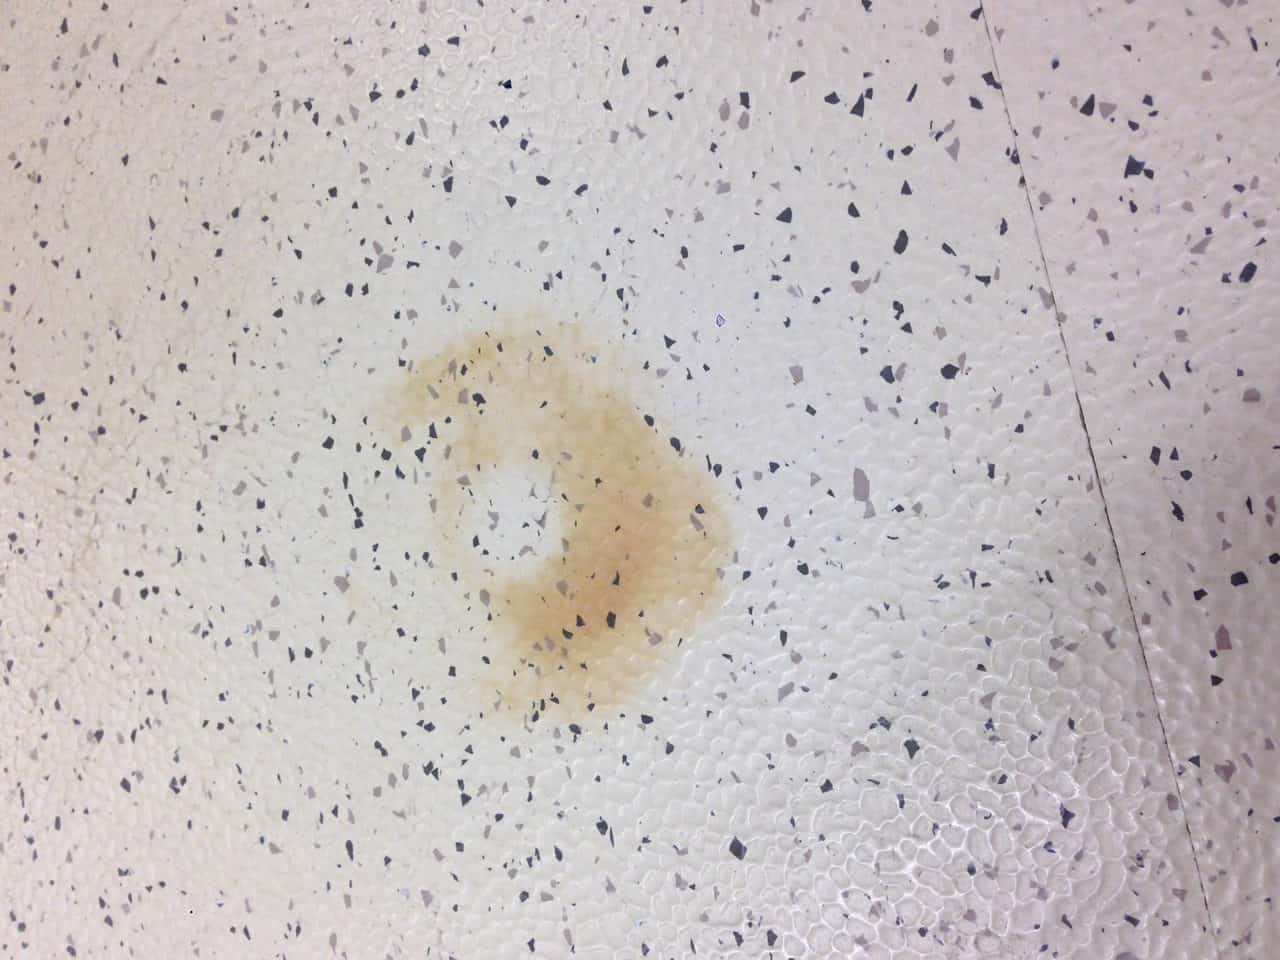 What Causes Discoloration on Resilient Floors?